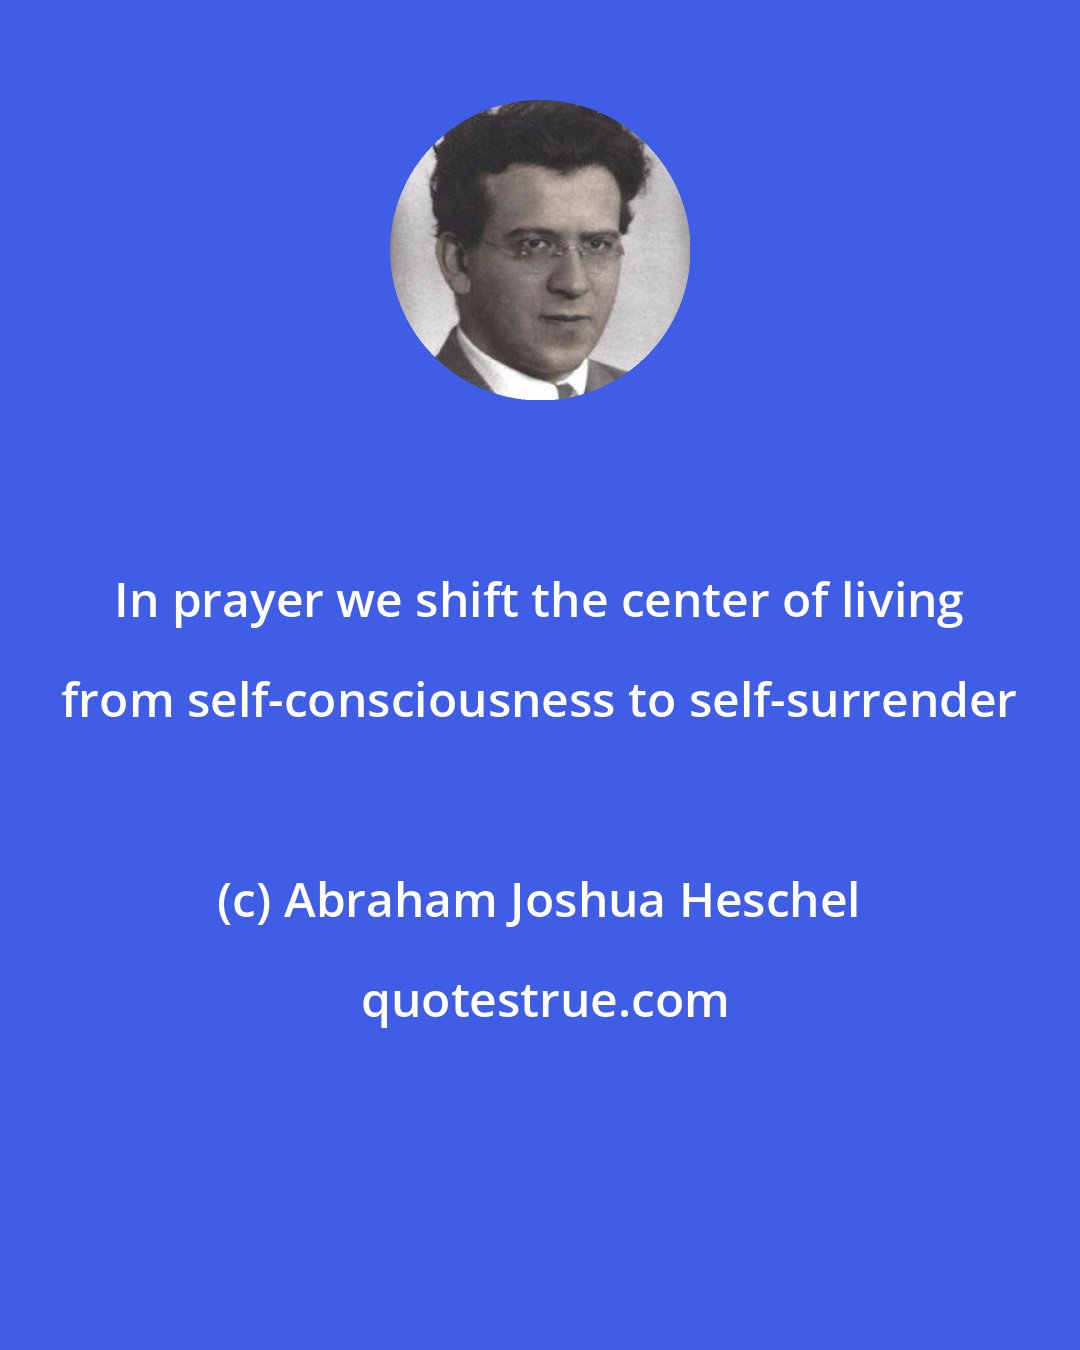 Abraham Joshua Heschel: In prayer we shift the center of living from self-consciousness to self-surrender